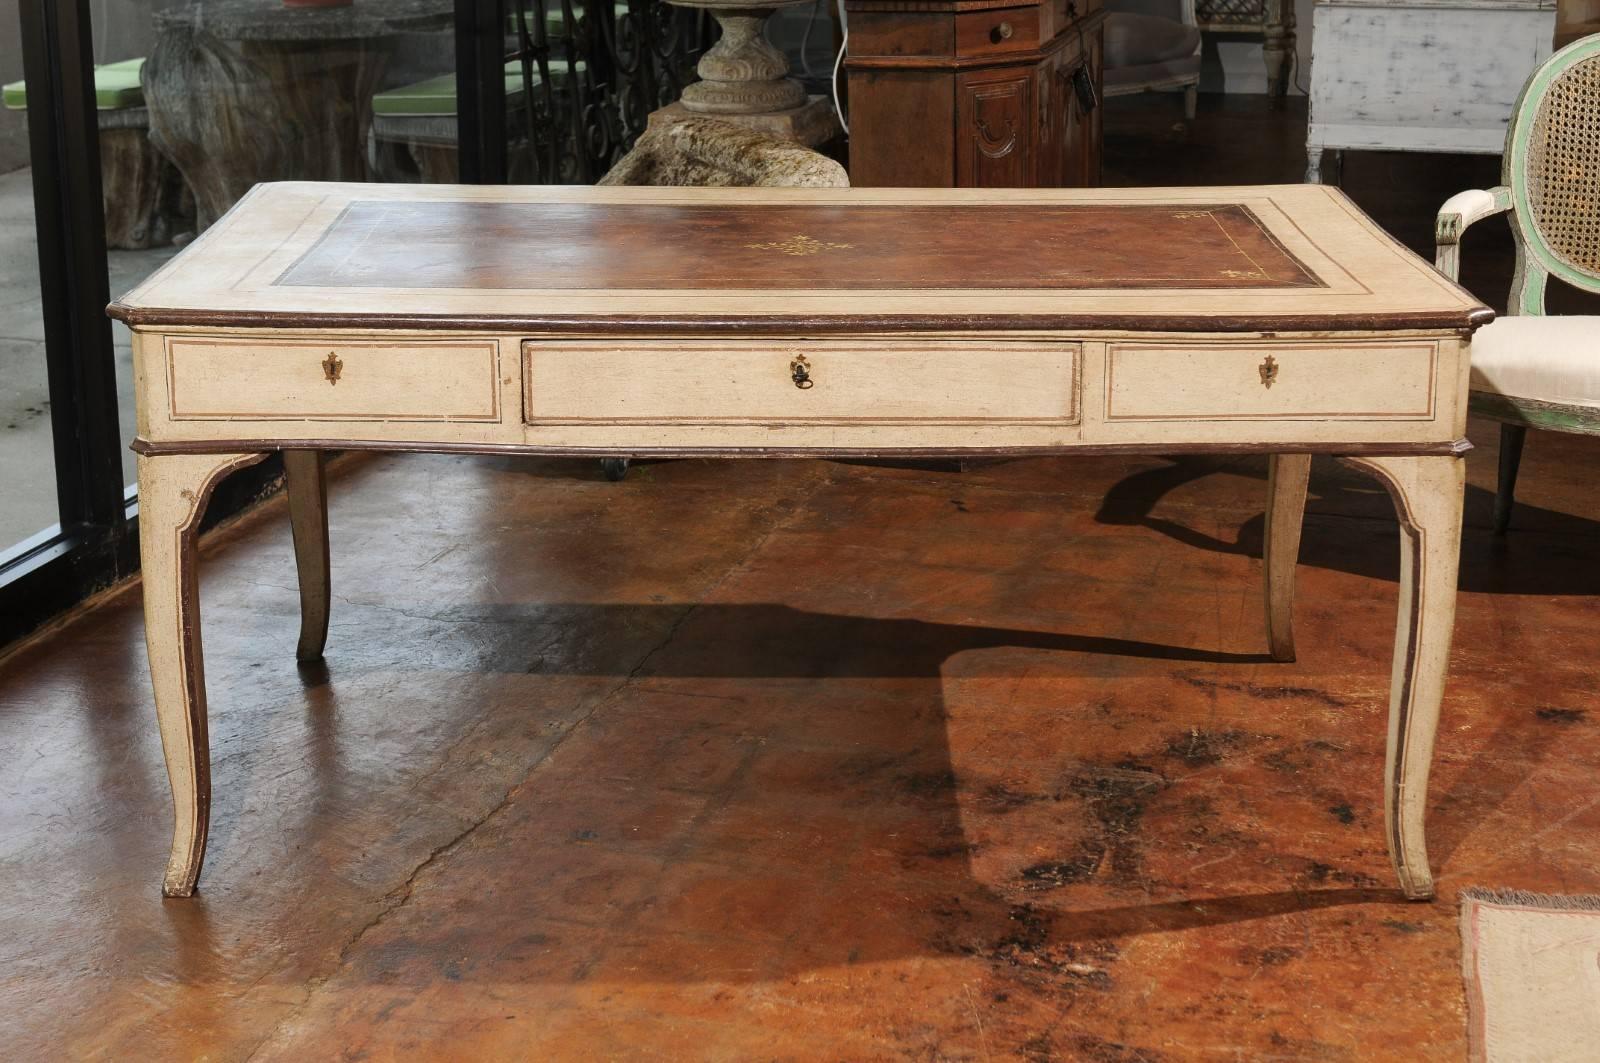 1790s Italian Painted Wood Desk with Hidden Drawers and Faux Leather Top 5